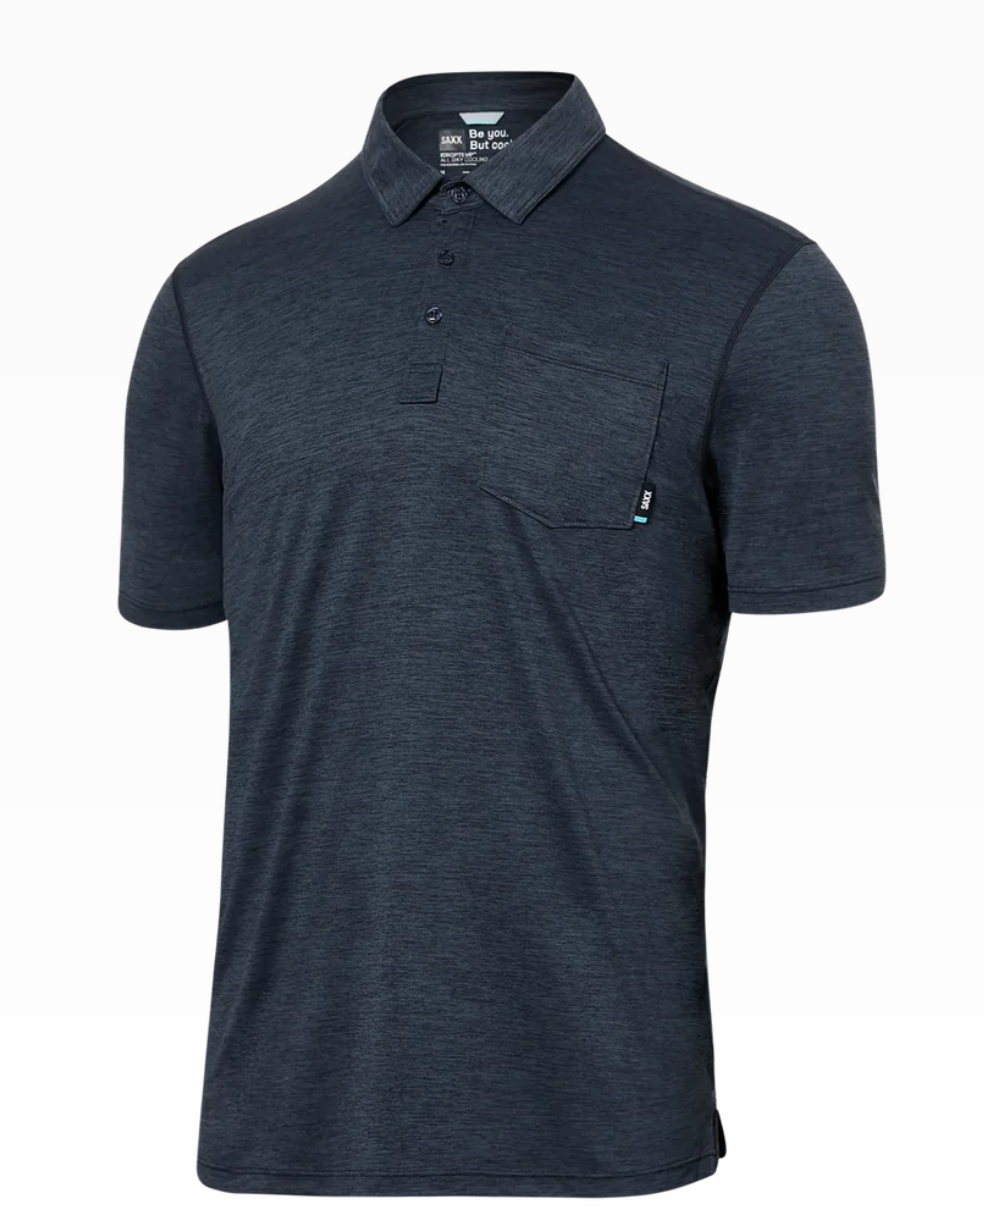 Saxx DropTemp All Day Cooling Short Sleeve Polo / Turbulence Heather